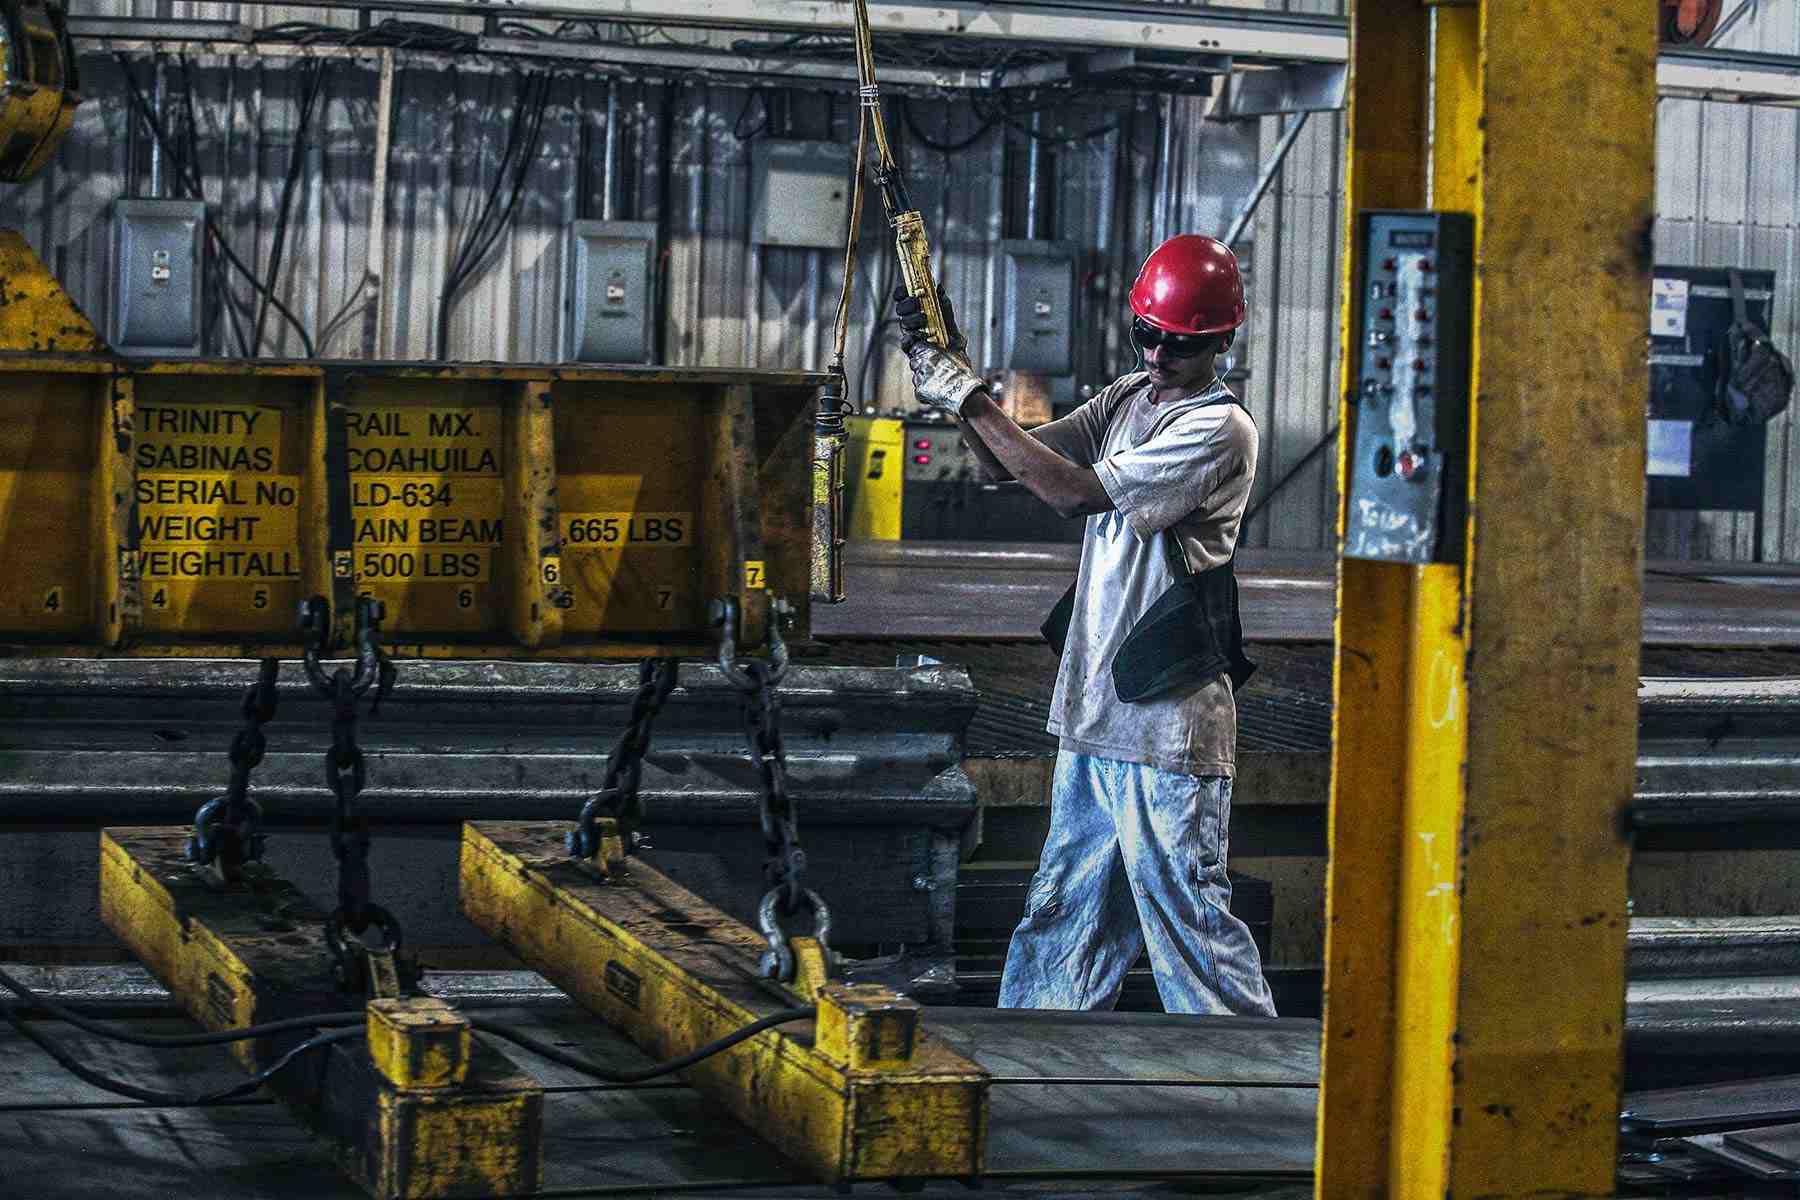 Effortless Power: Factory Worker Operating Heavy Lifting Equipment